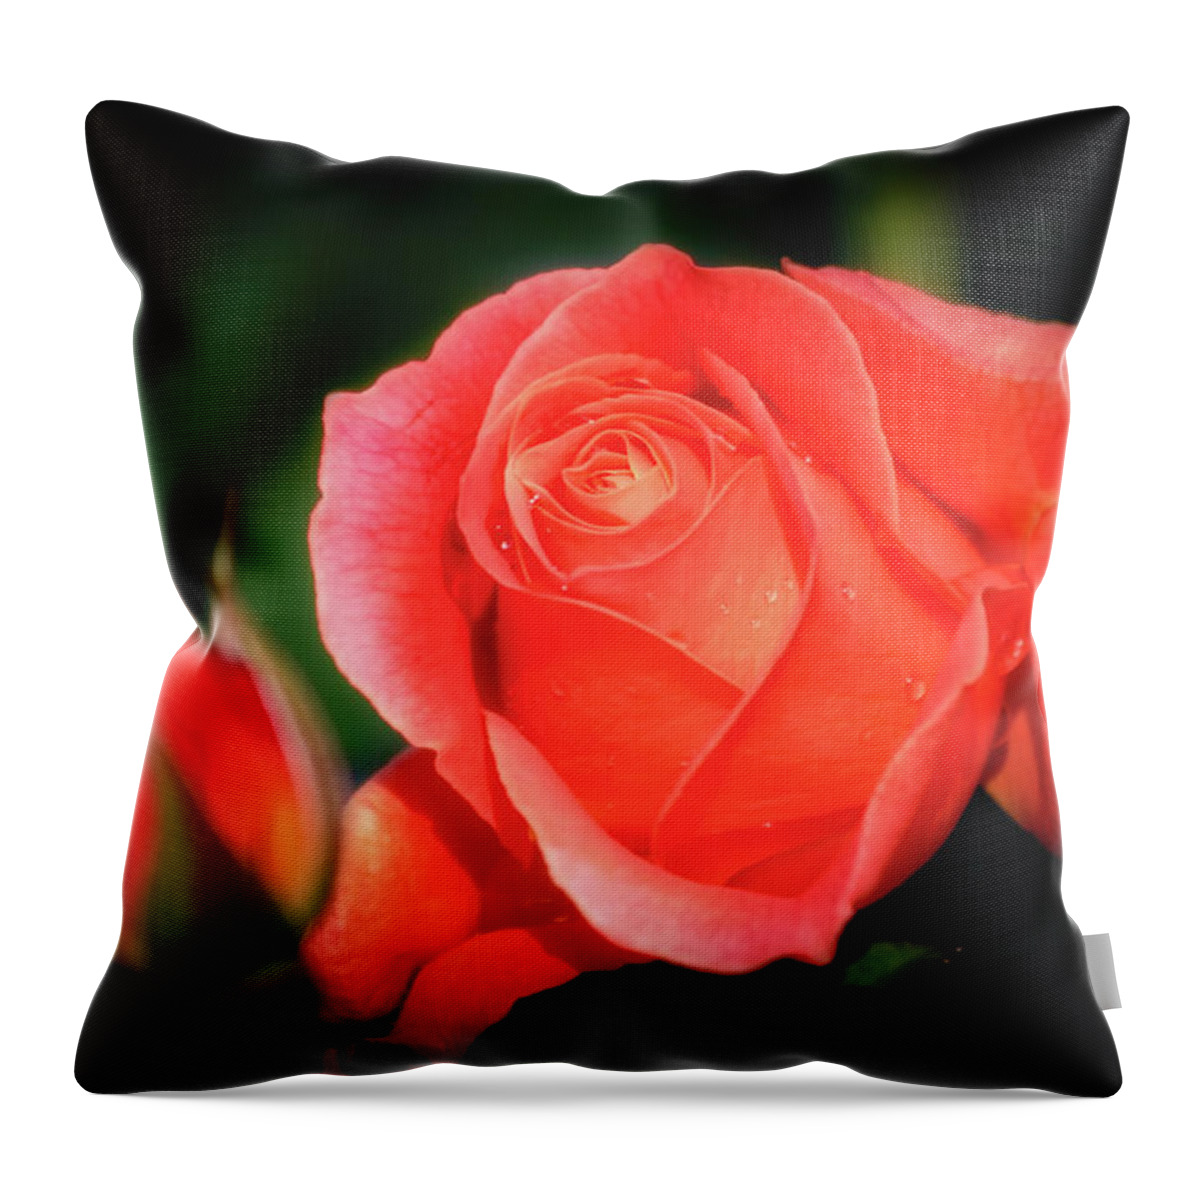 Flower Throw Pillow featuring the photograph Tropicana Rose by Albert Seger